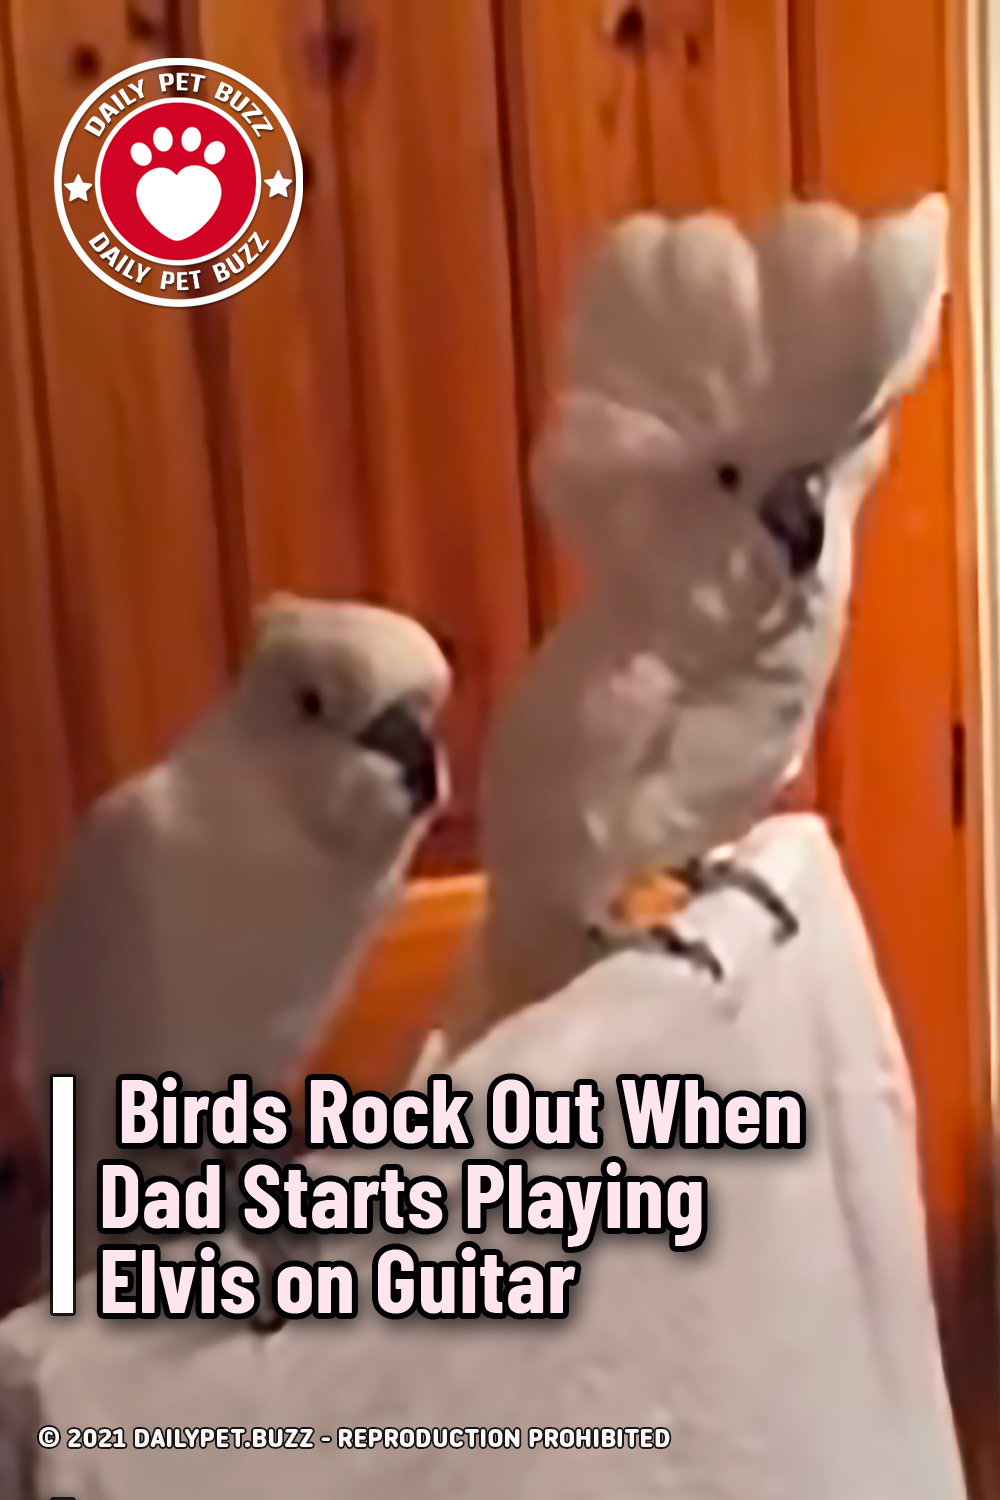 Birds Rock Out When Dad Starts Playing Elvis on Guitar